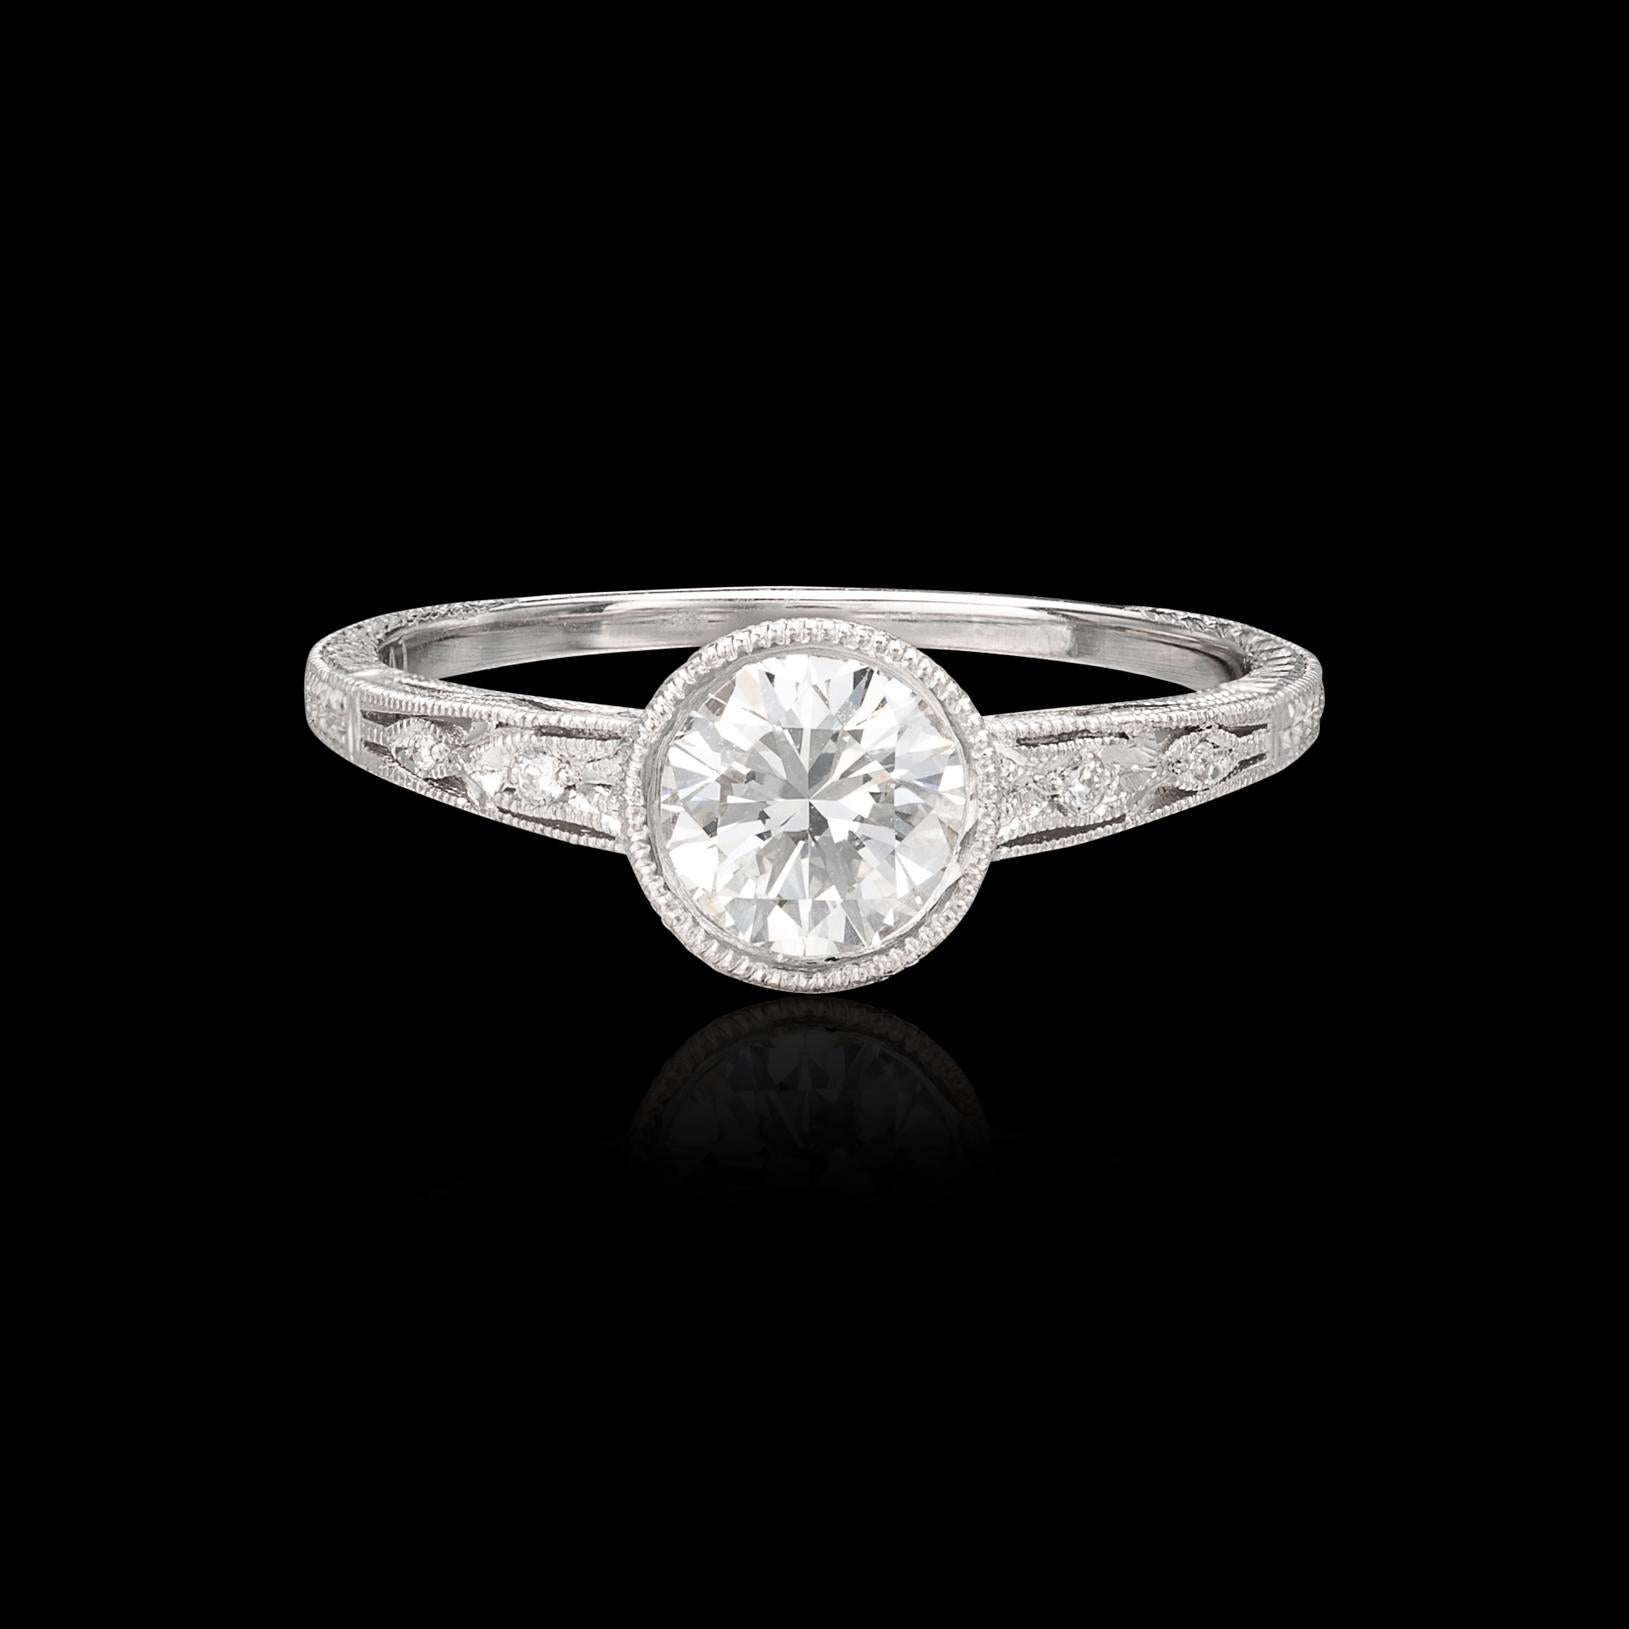 Where classic Art Deco design meets modern craftsmanship. This platinum stunner features a 0.93 carat round brilliant cut diamond expertly bezel set to showcase its beautiful GIA F/SI1 grade. This stunning ring is accented with gorgeous milgrain and